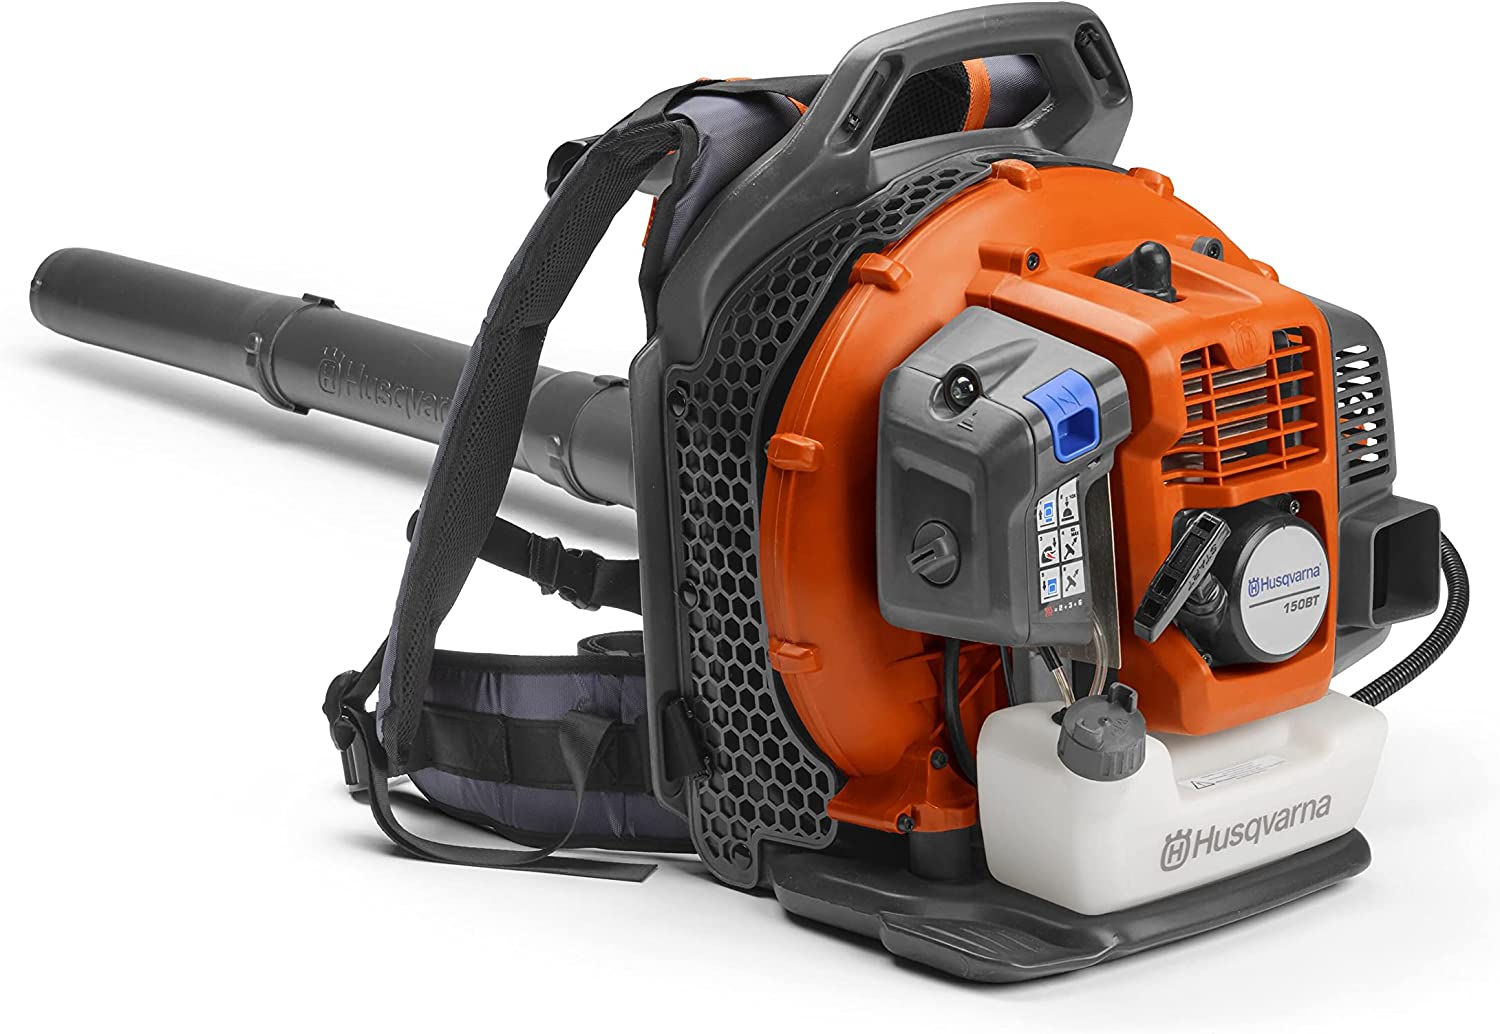 Husqvarna 150BT 50cc Backpack Blower 952991658 (Factory Reconditioned)